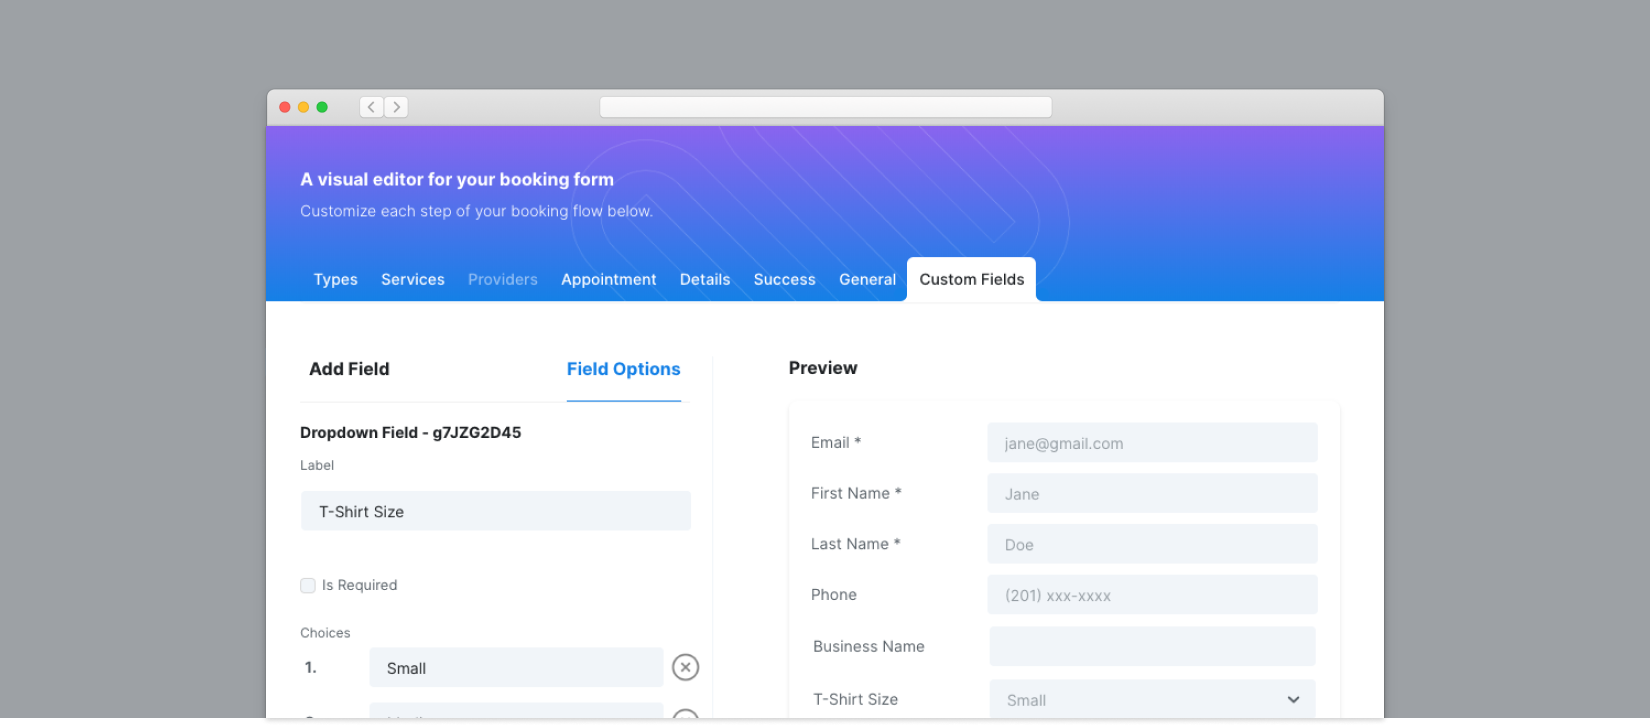 It's been a long time coming but we are happy to announce the release of custom fields for your booking forms. Learn how to customize your booking forms for success.